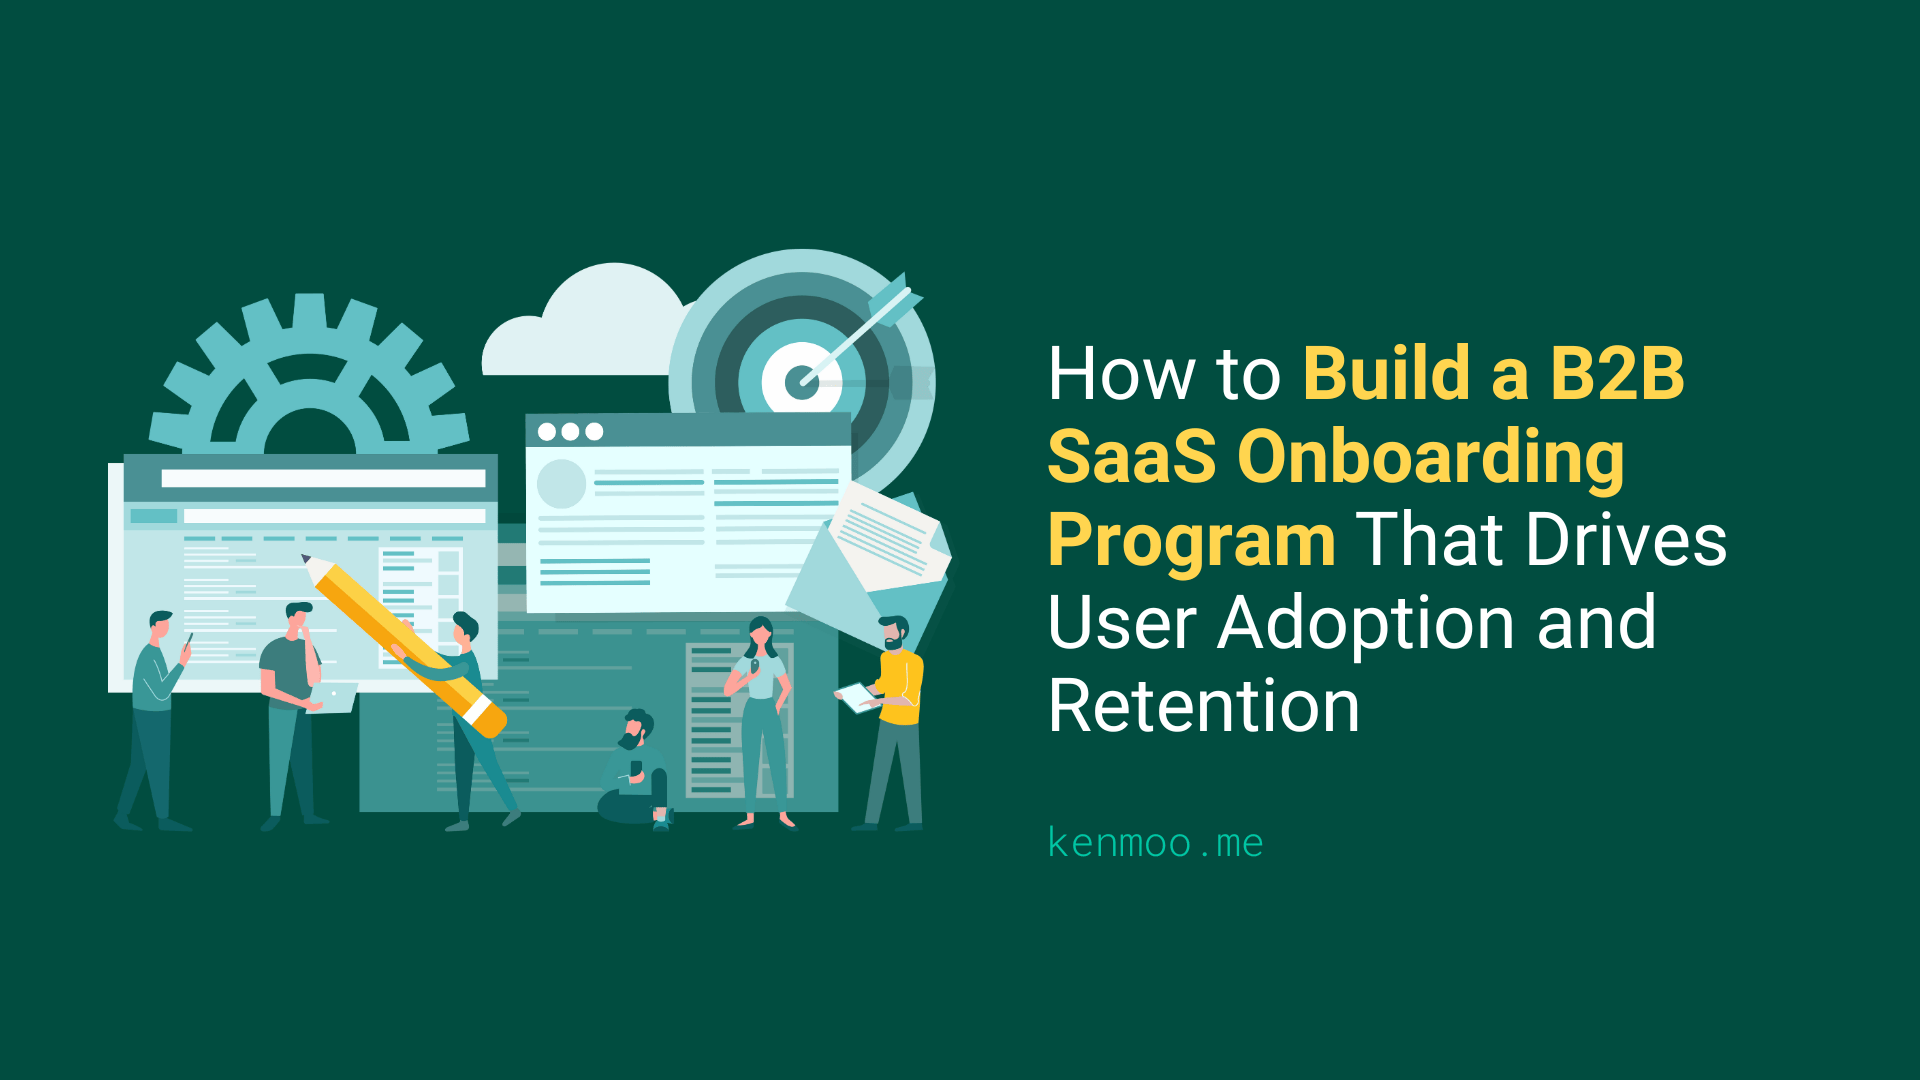 How to Build a B2B SaaS Onboarding Program That Drives User Adoption and Retention